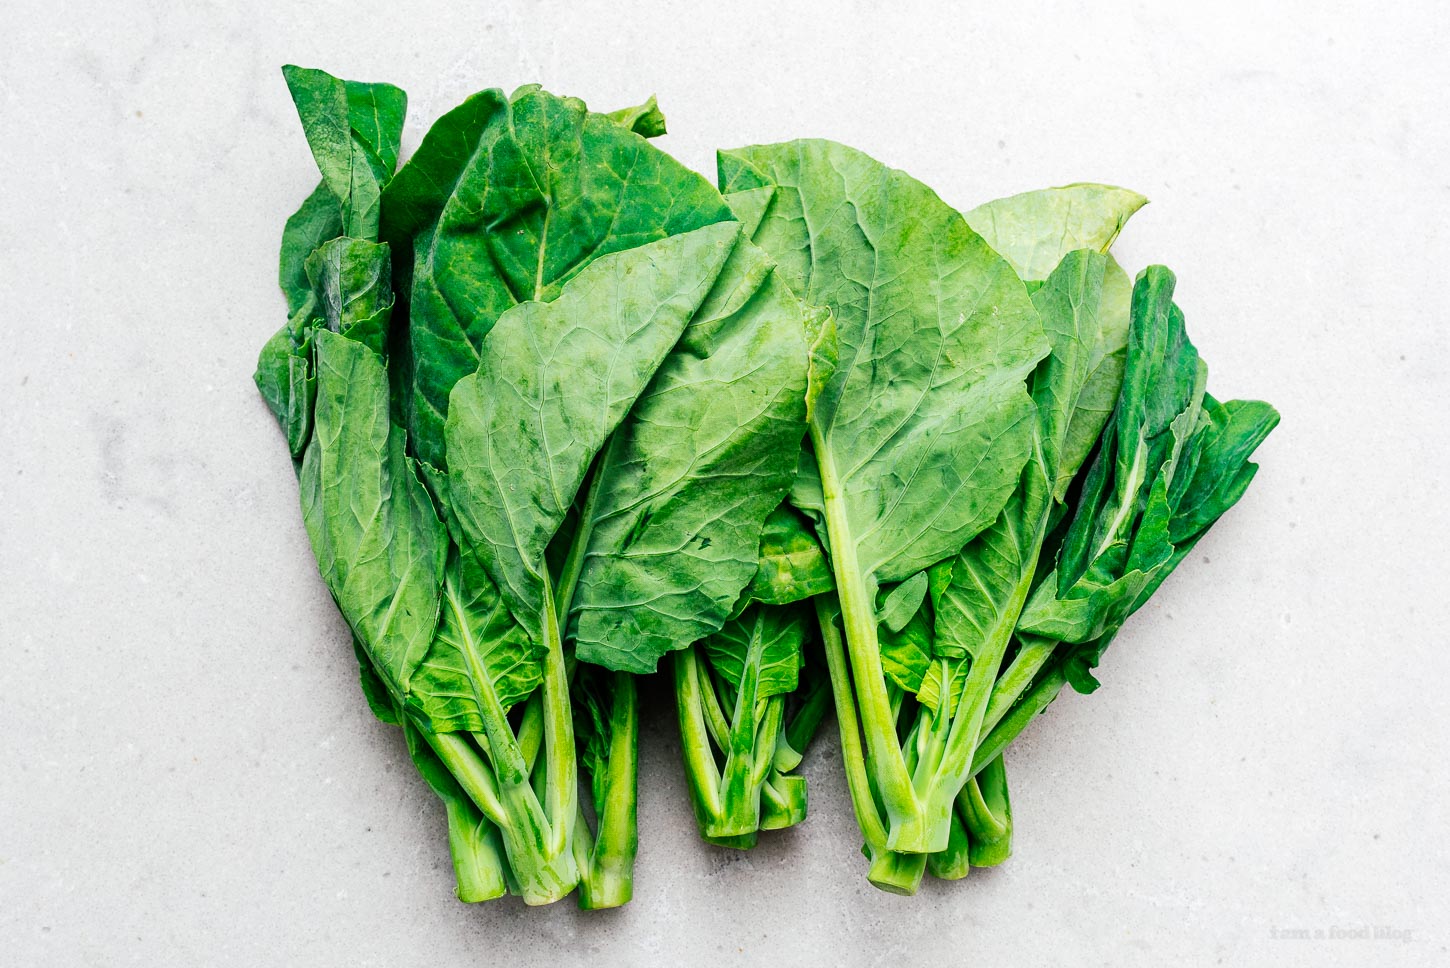 Chinese broccoli also known as gai lan | www.iamafoodblog.com